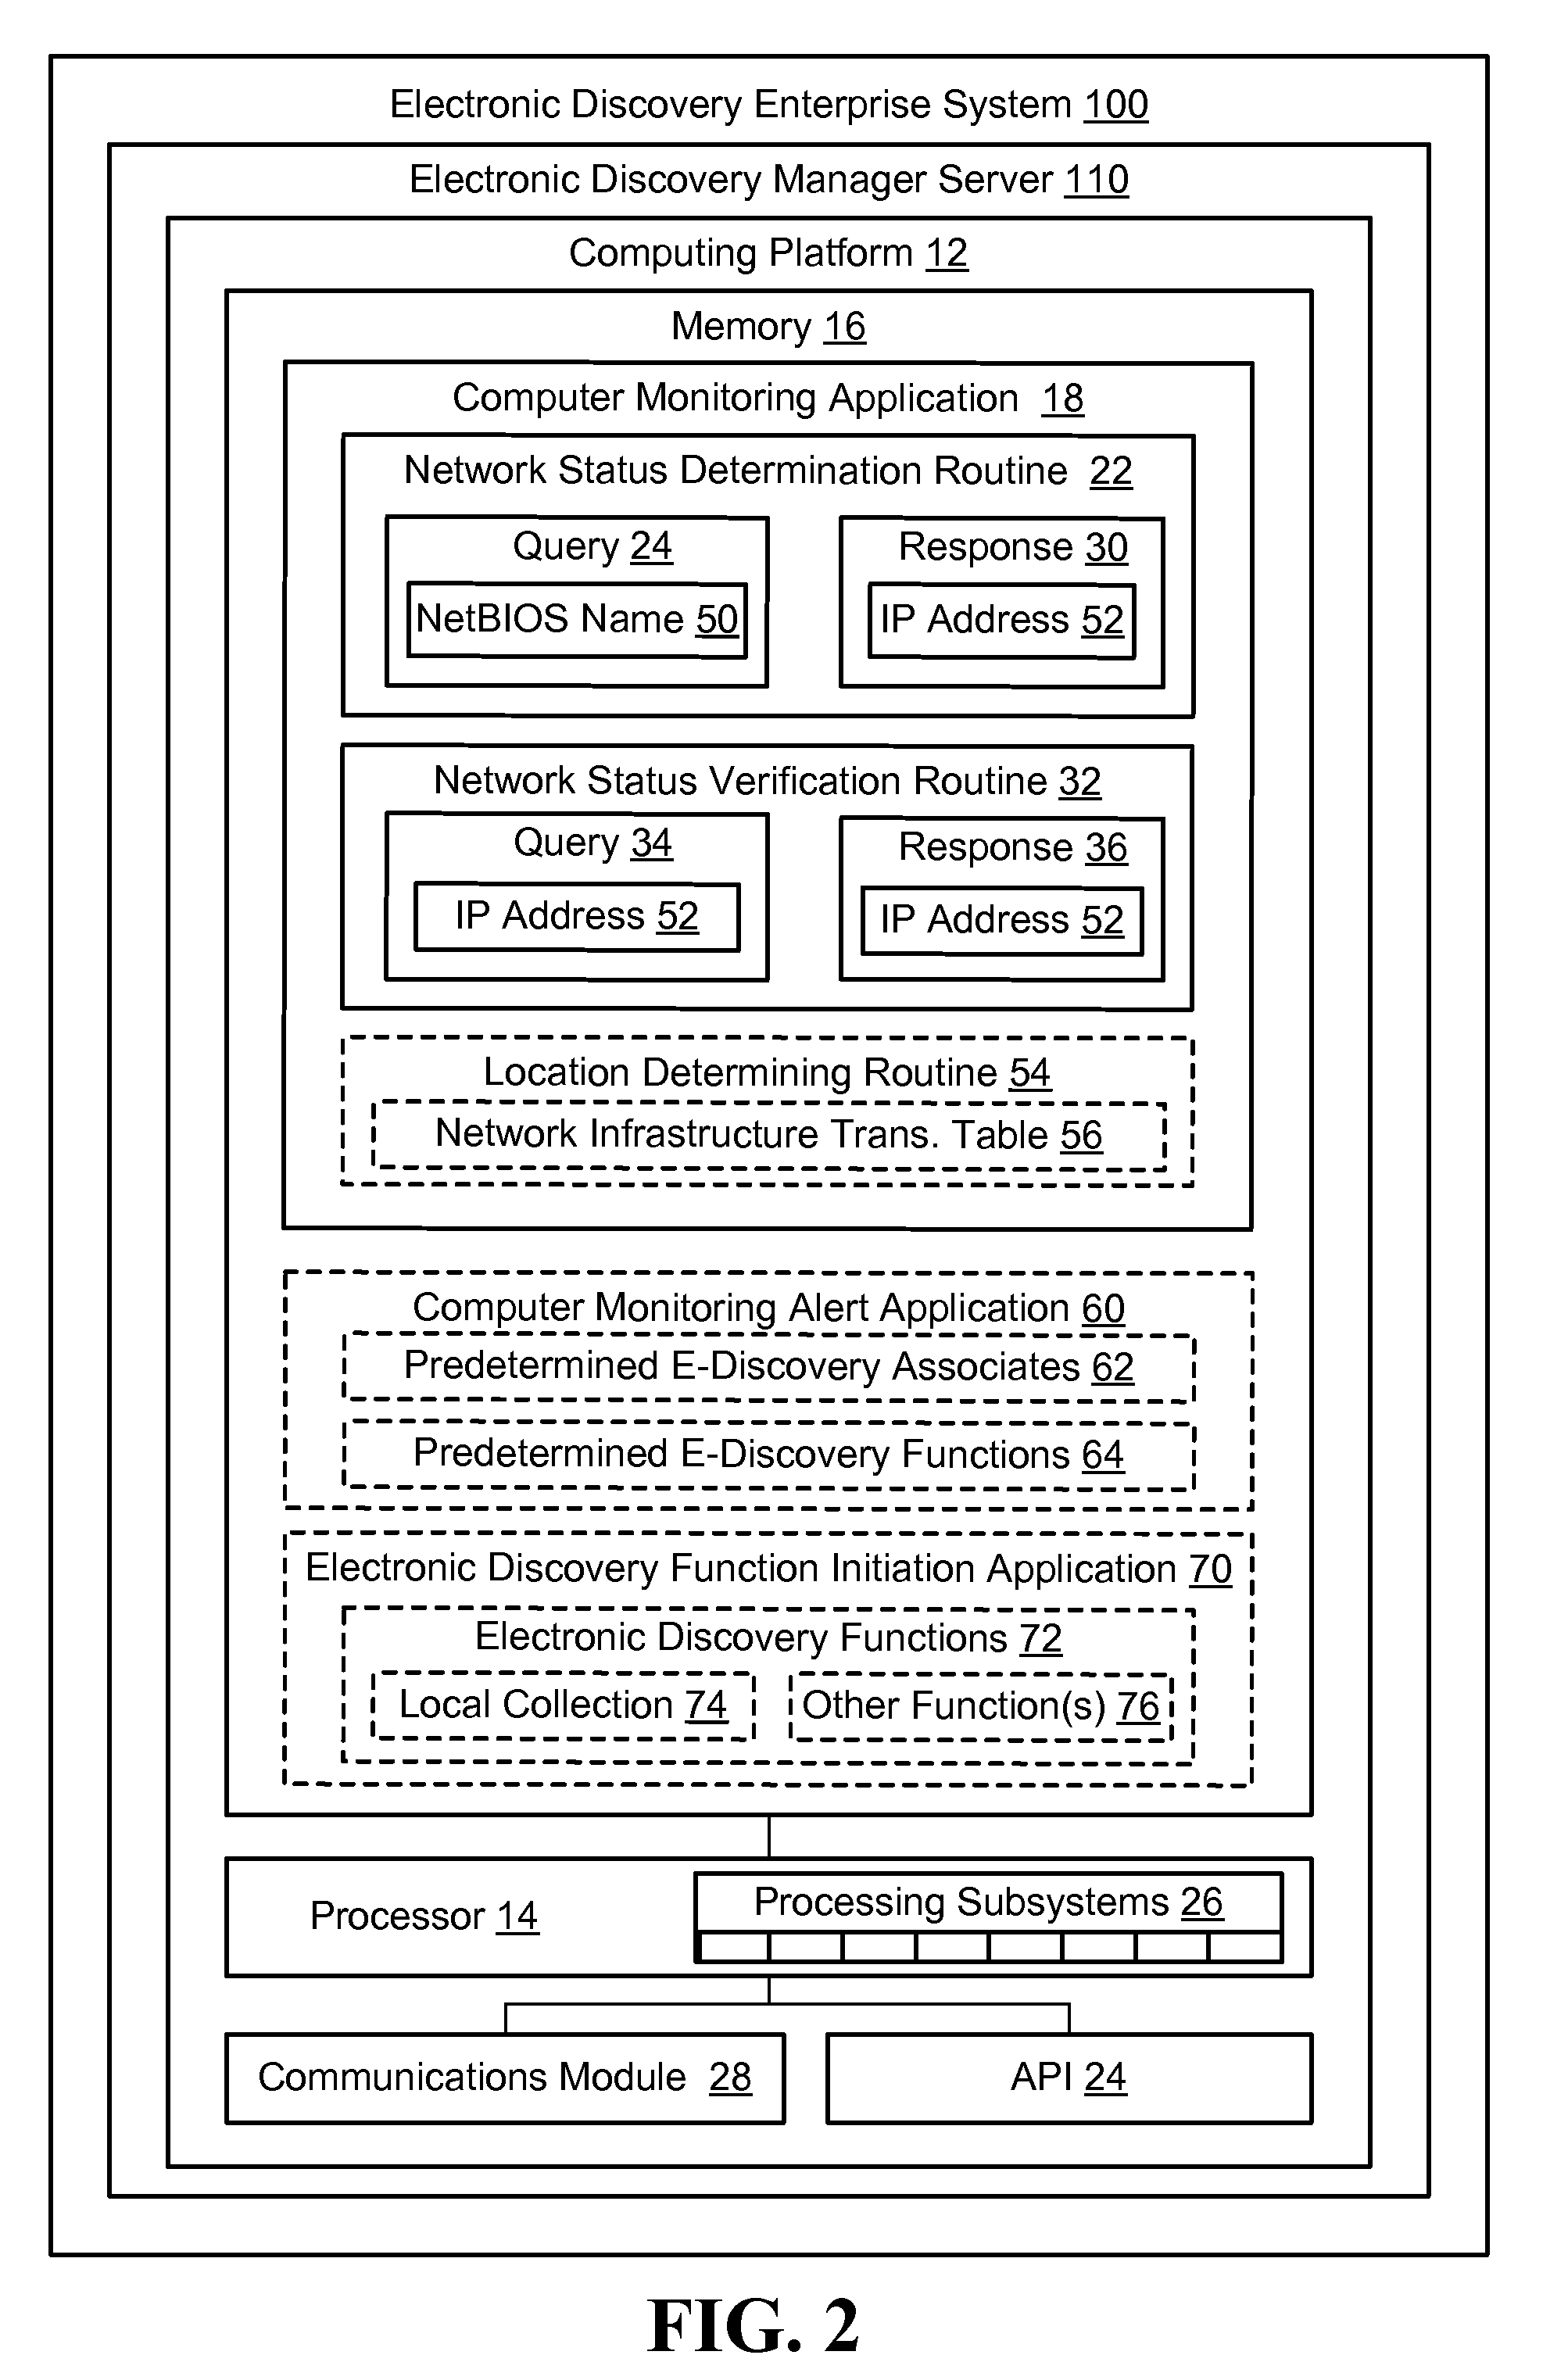 Monitoring an enterprise network for determining specified computing device usage